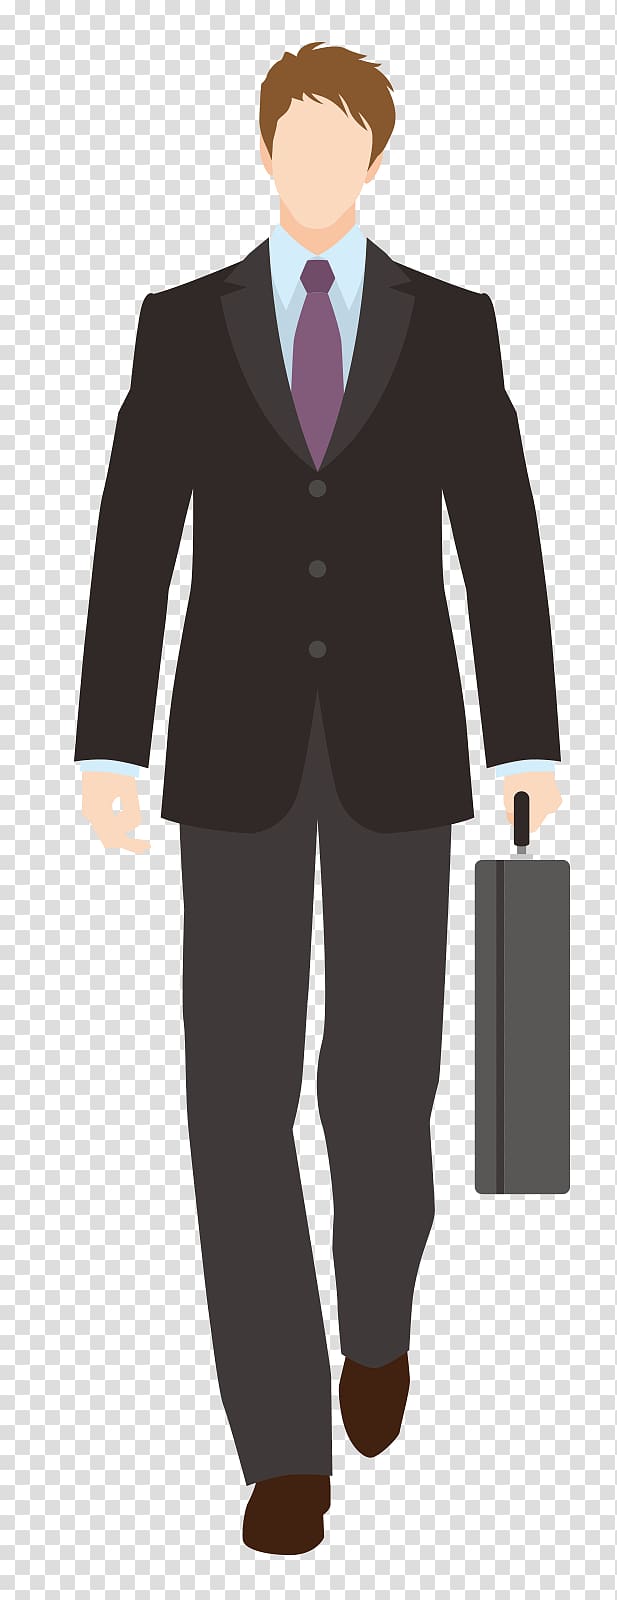 Suit Jacket Formal wear Trousers Button, Wearing a suit of staff transparent background PNG clipart